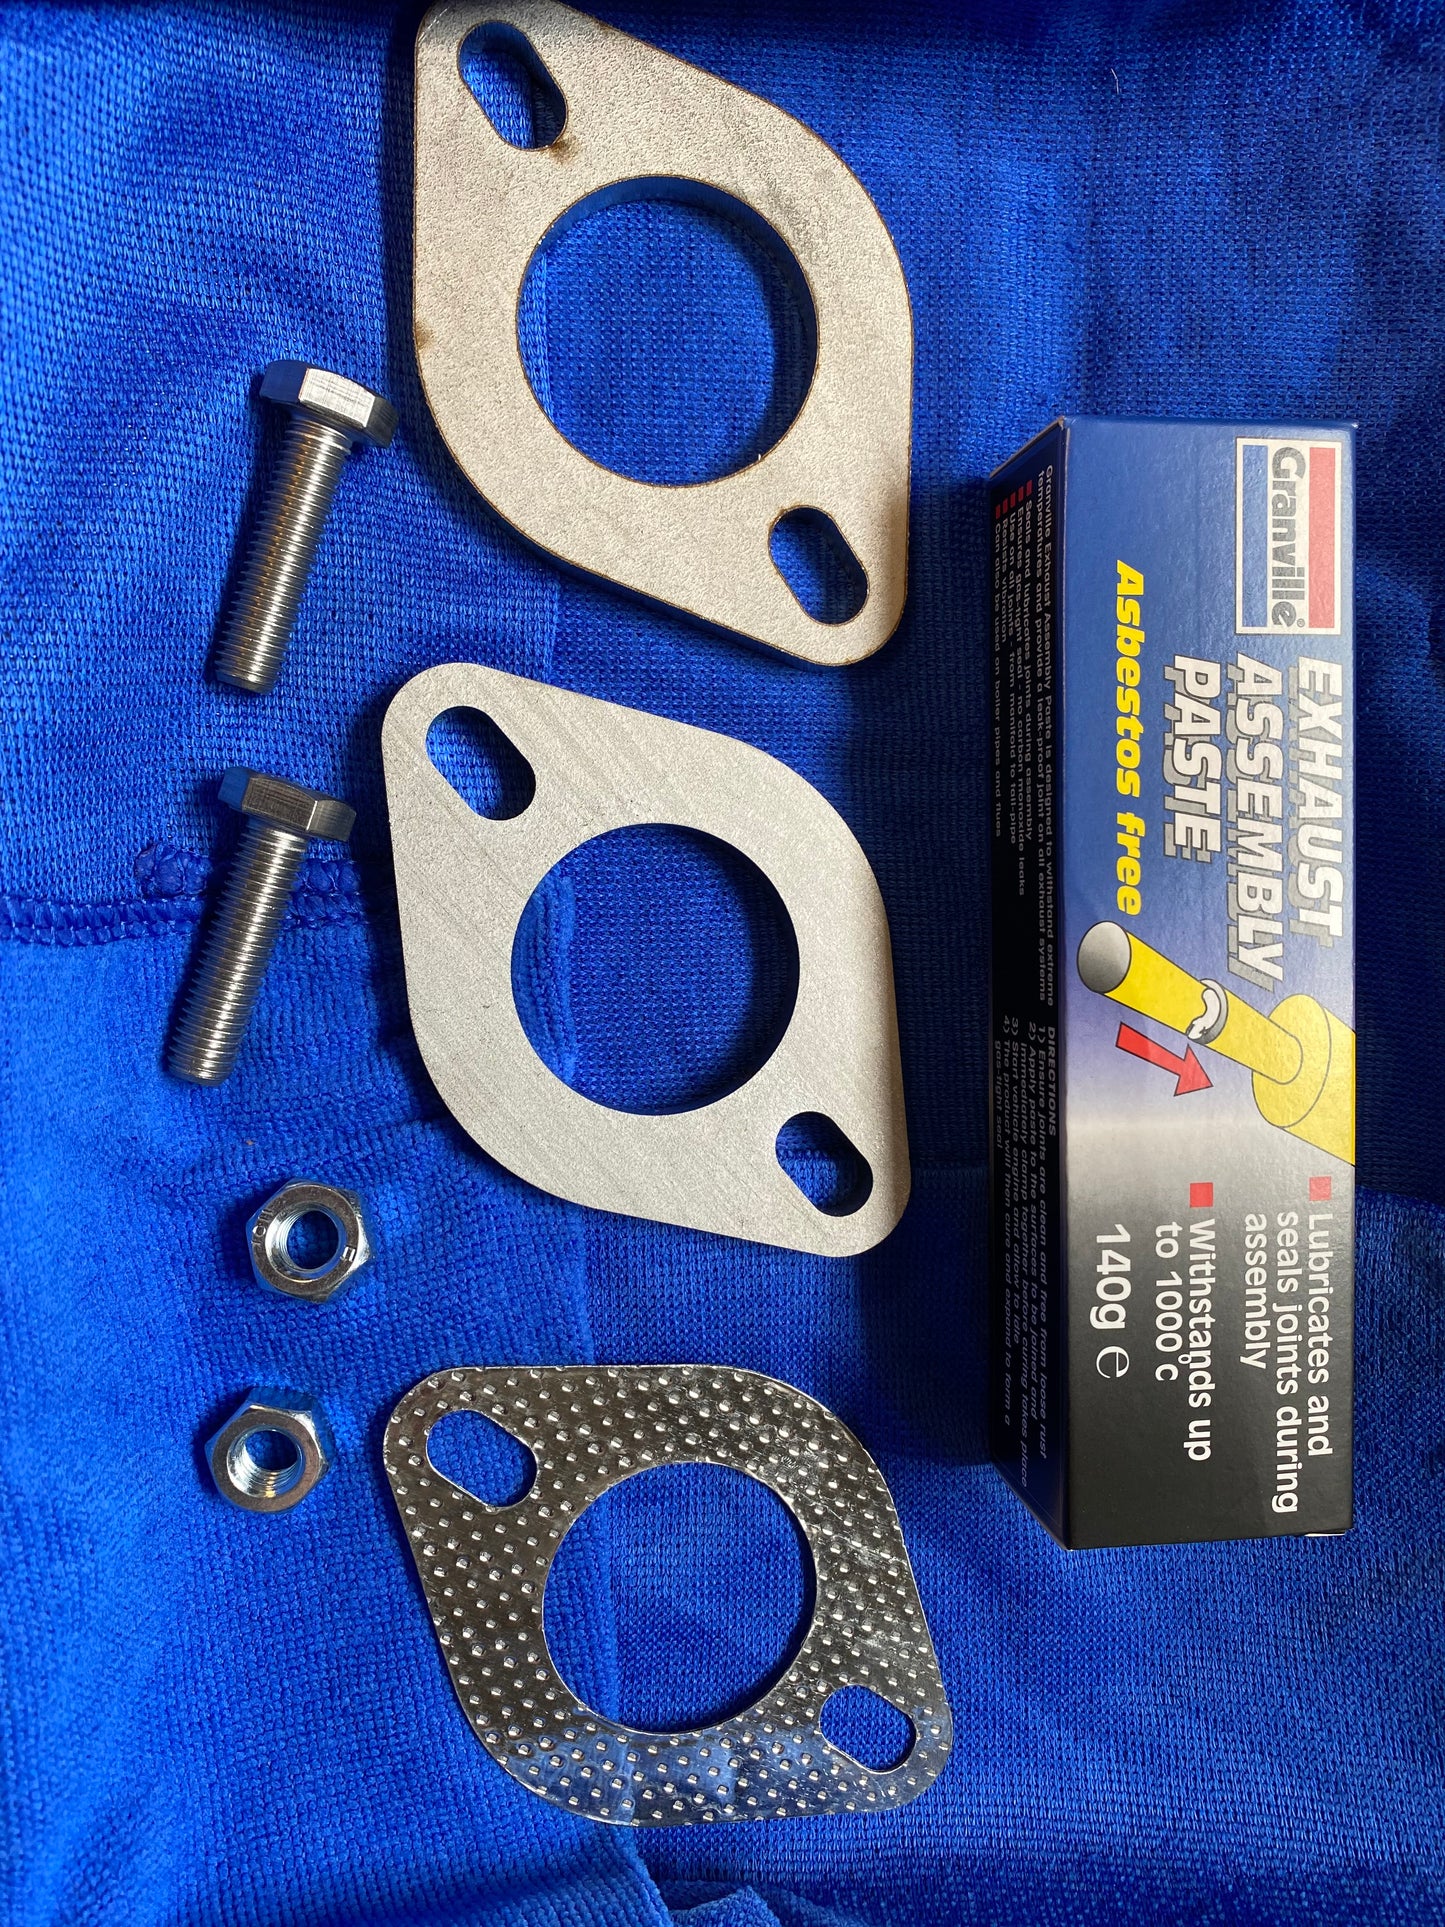 Stainless Steel 1.75" Exhaust Flange and Gasket Kit with Exhaust Sealant Paste - Pipe Dynamics